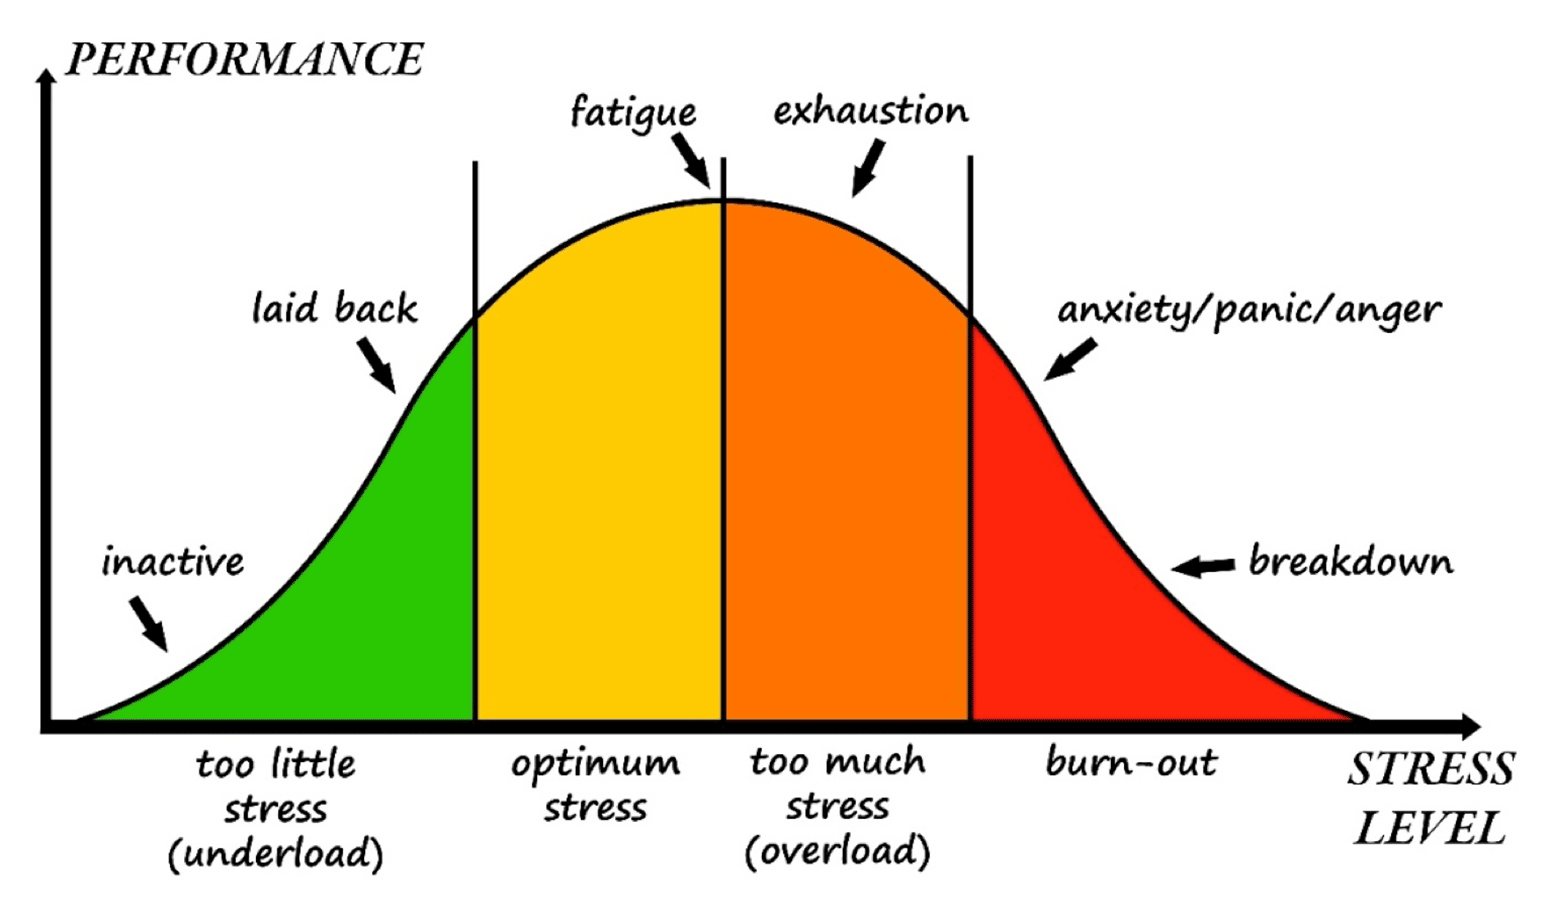 Relationship between performance and stress